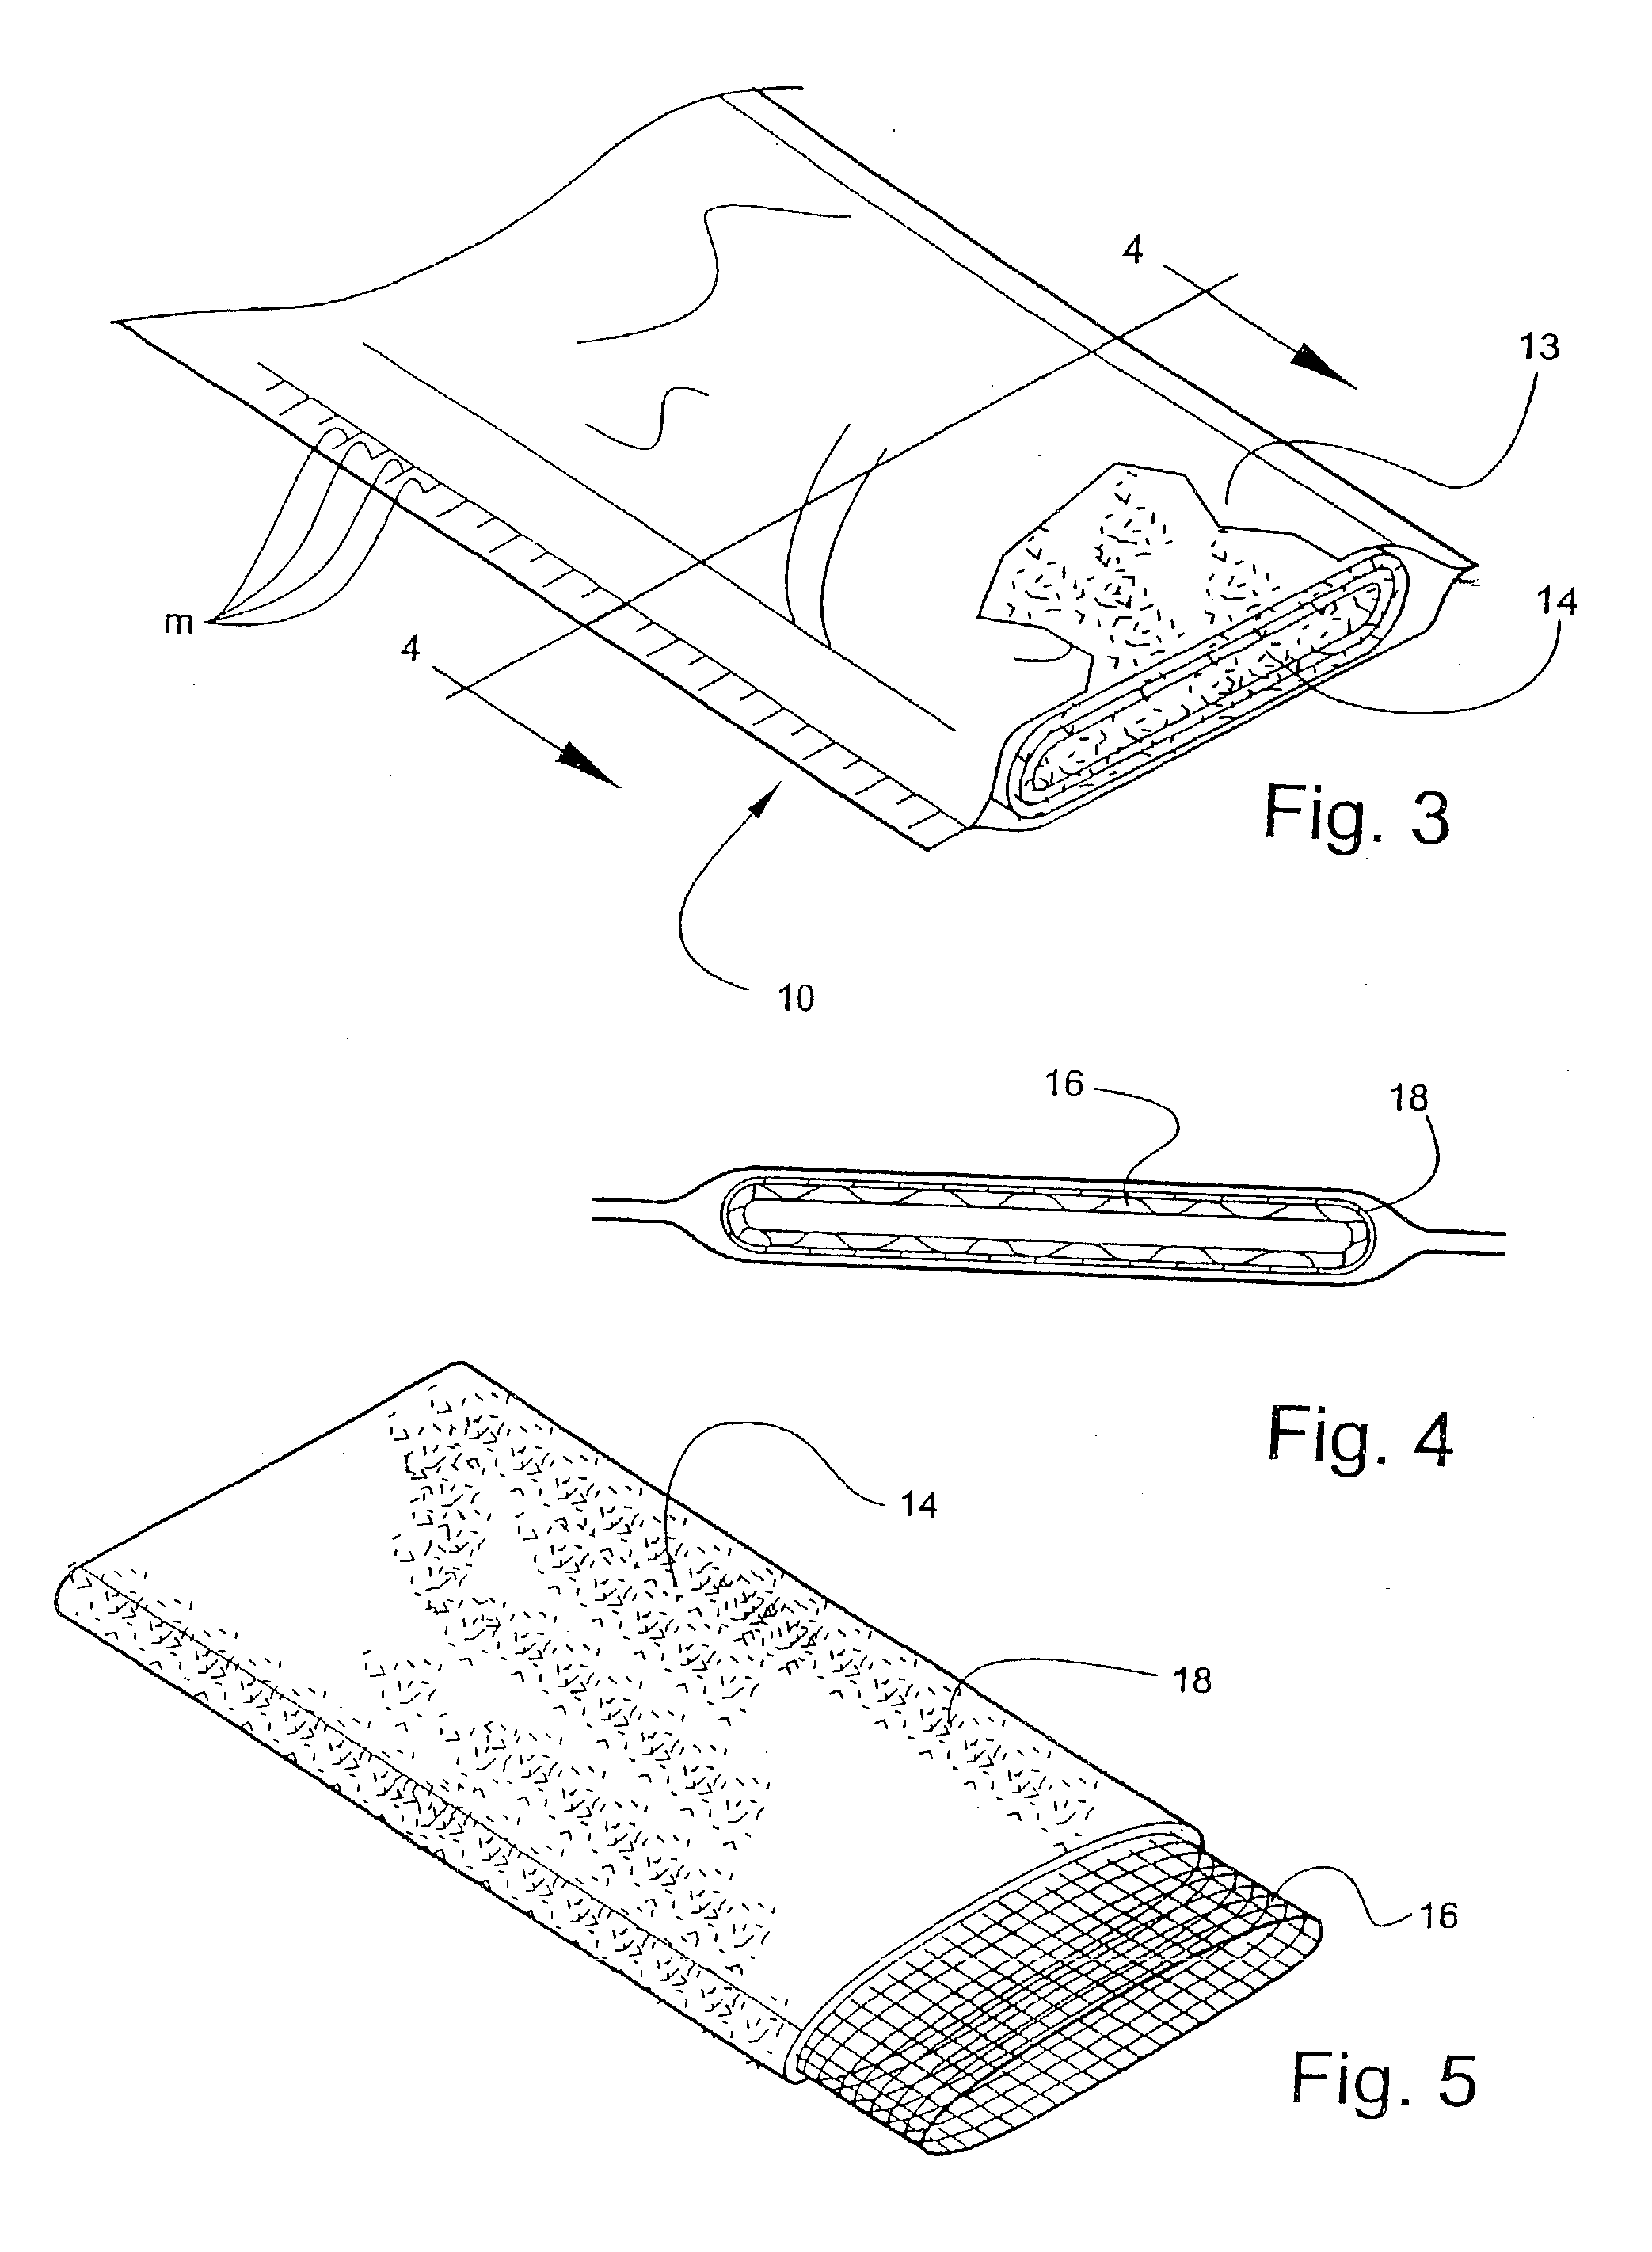 Medical bandaging product with tubular-knitted substrate and method of constructing same